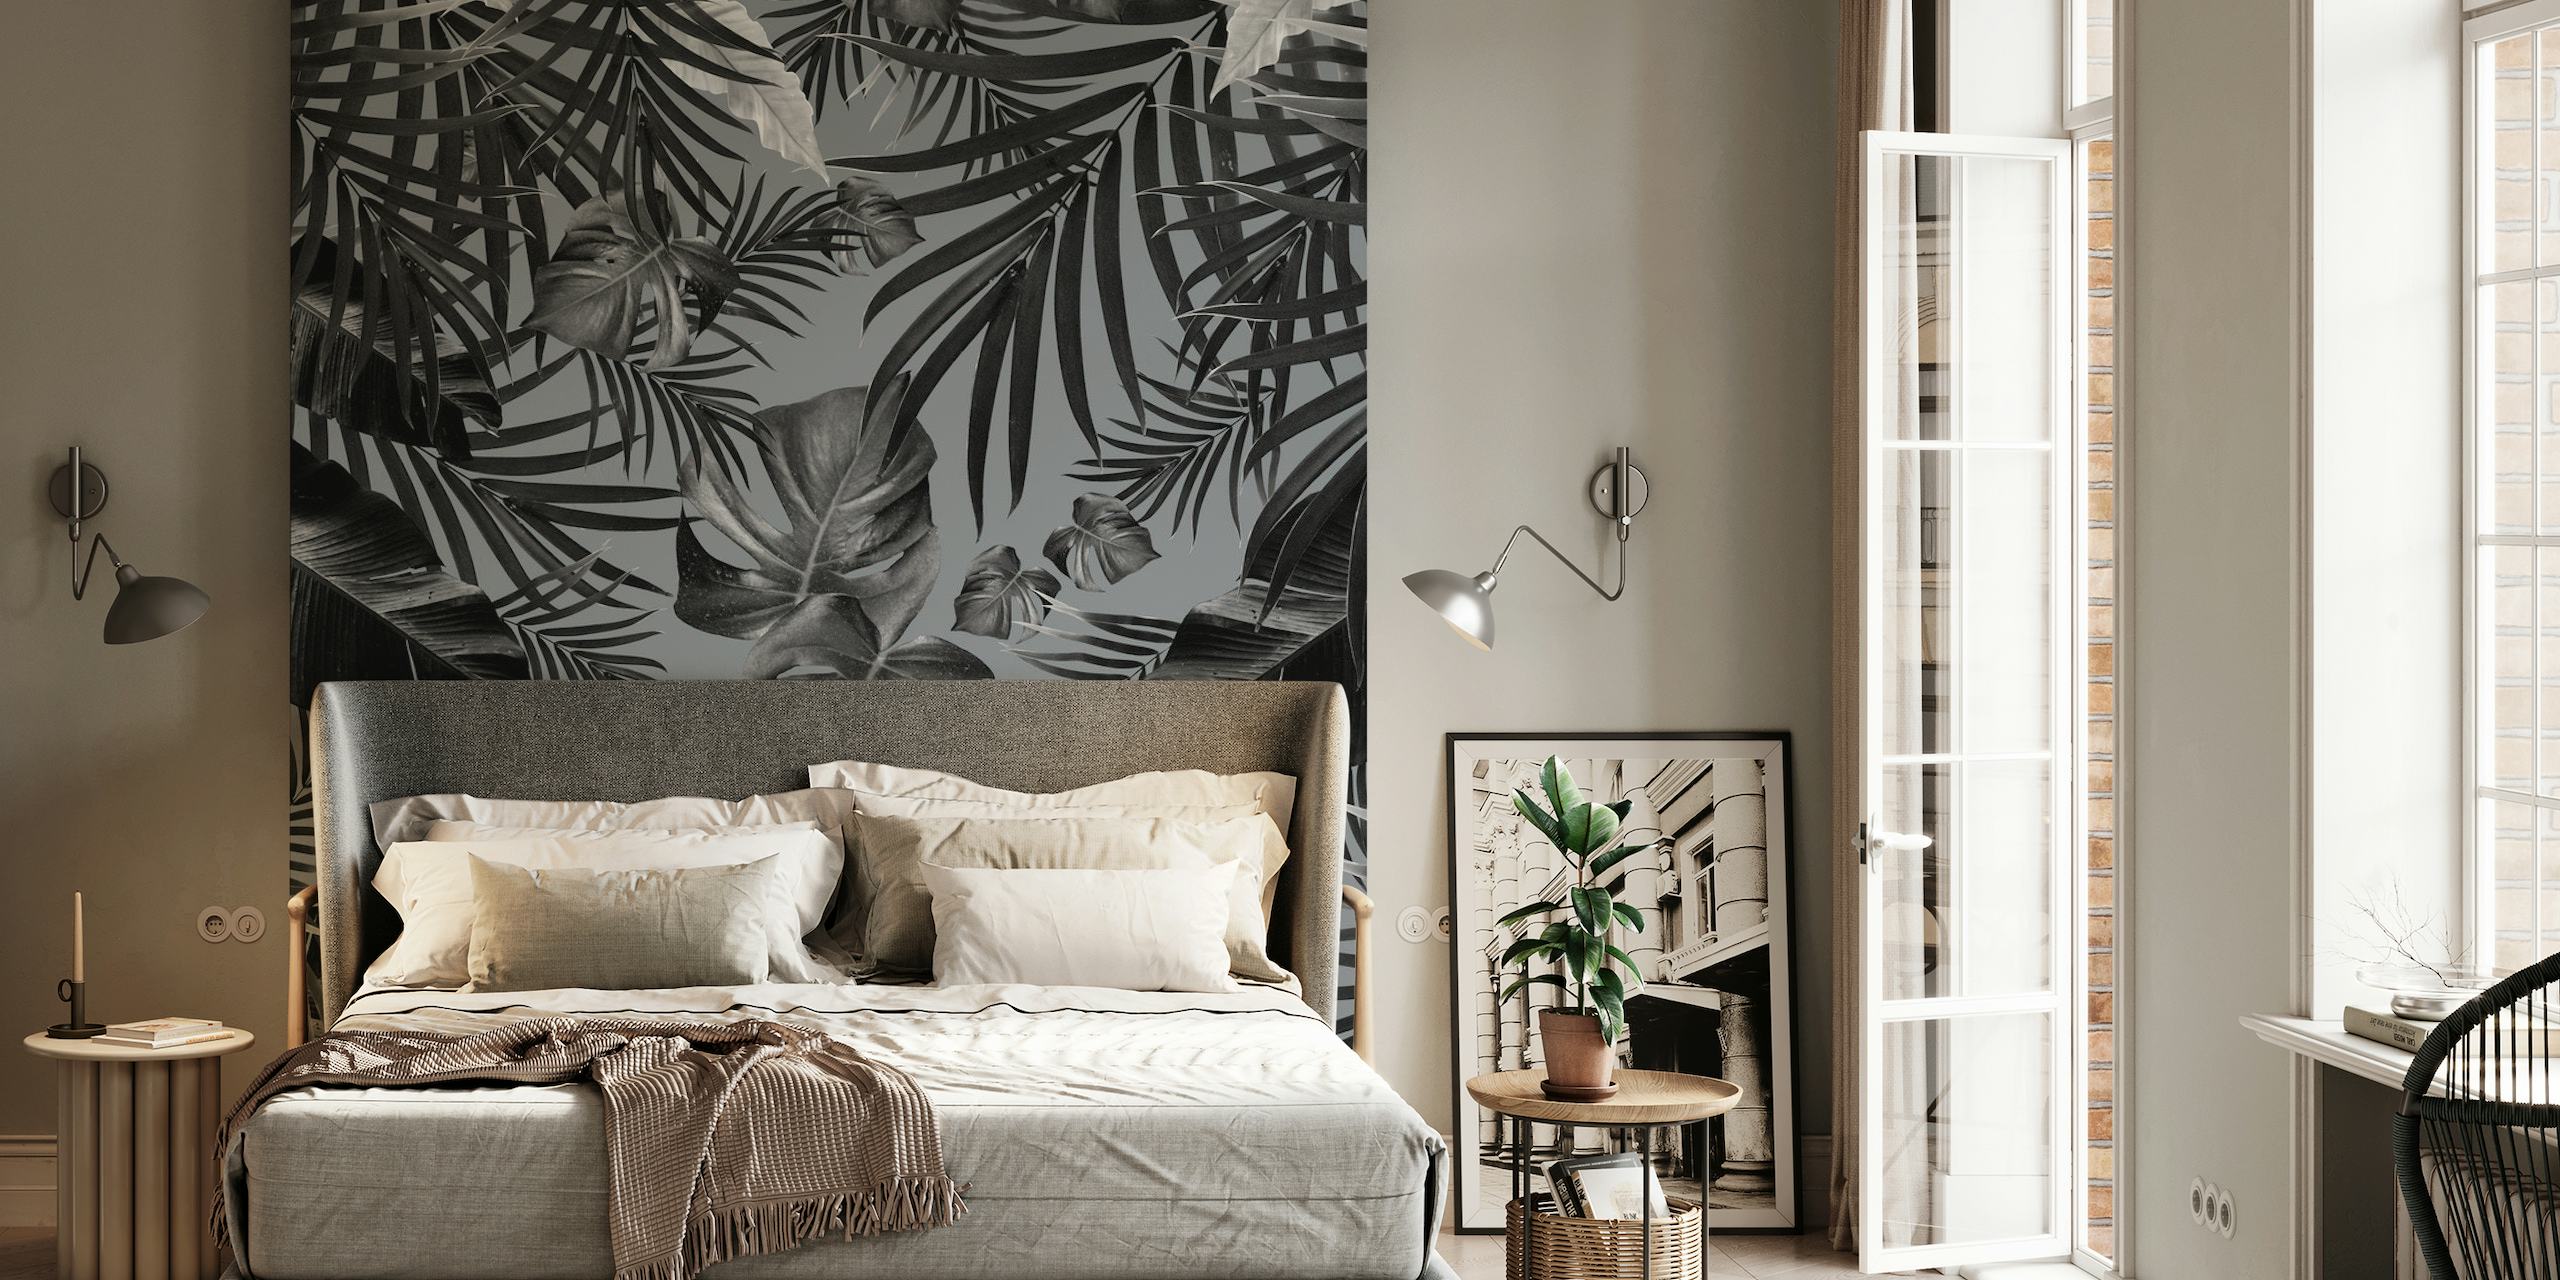 Monochrome tropical leaf pattern wall mural for interior decor